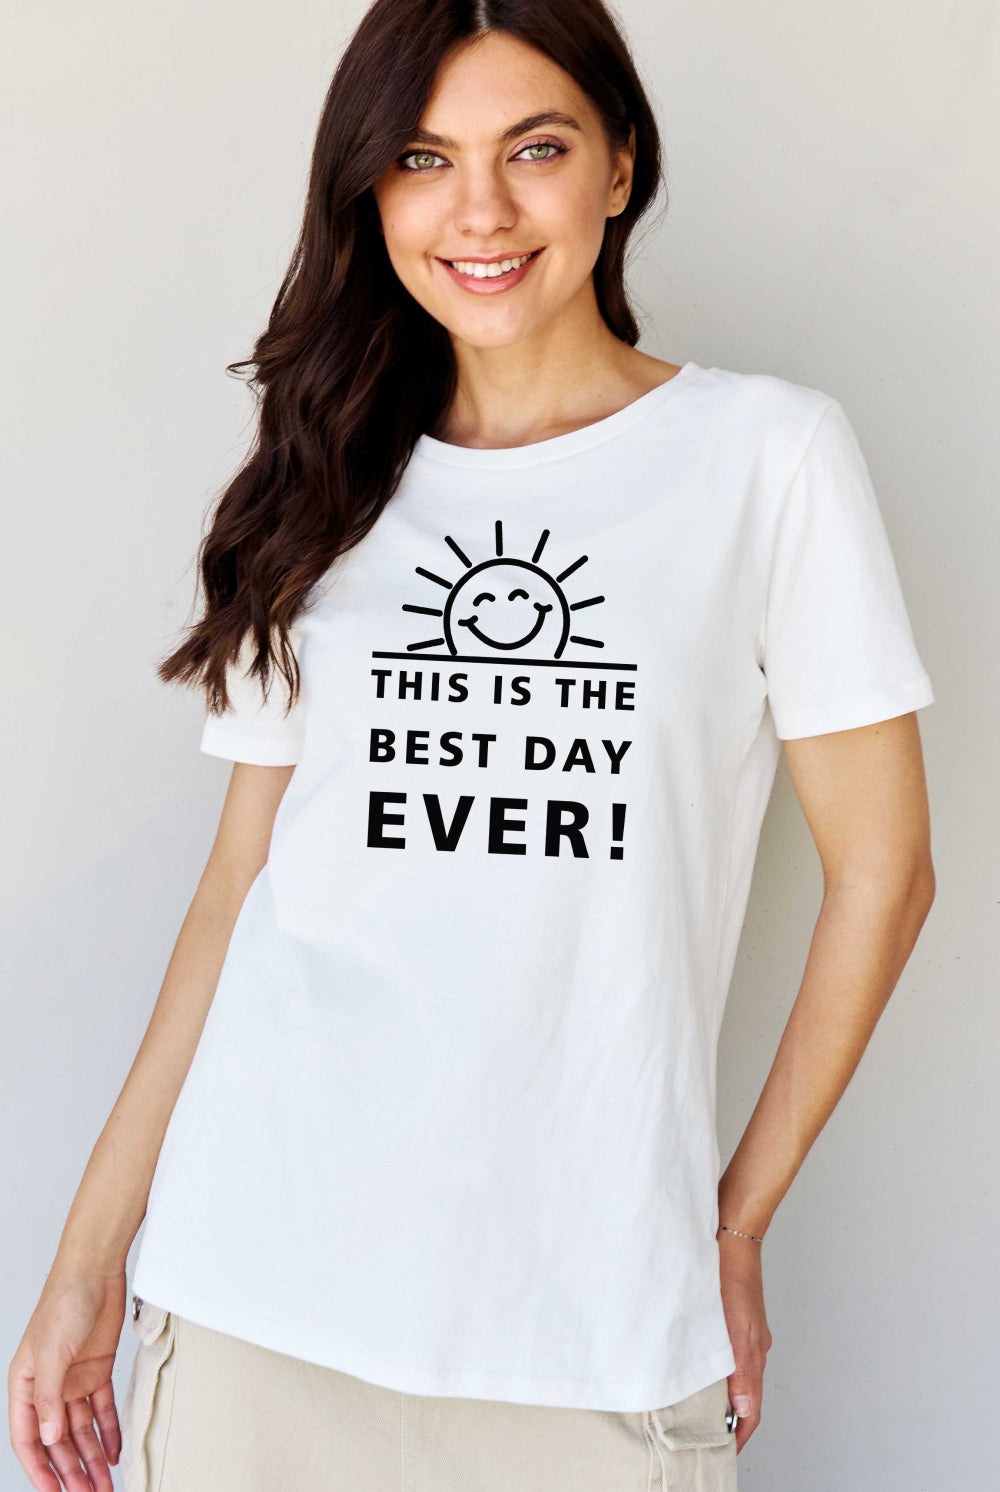 Light Gray Simply Love Full Size THIS IS THE BEST DAY EVER! Graphic Cotton T-Shirt Graphic Tees